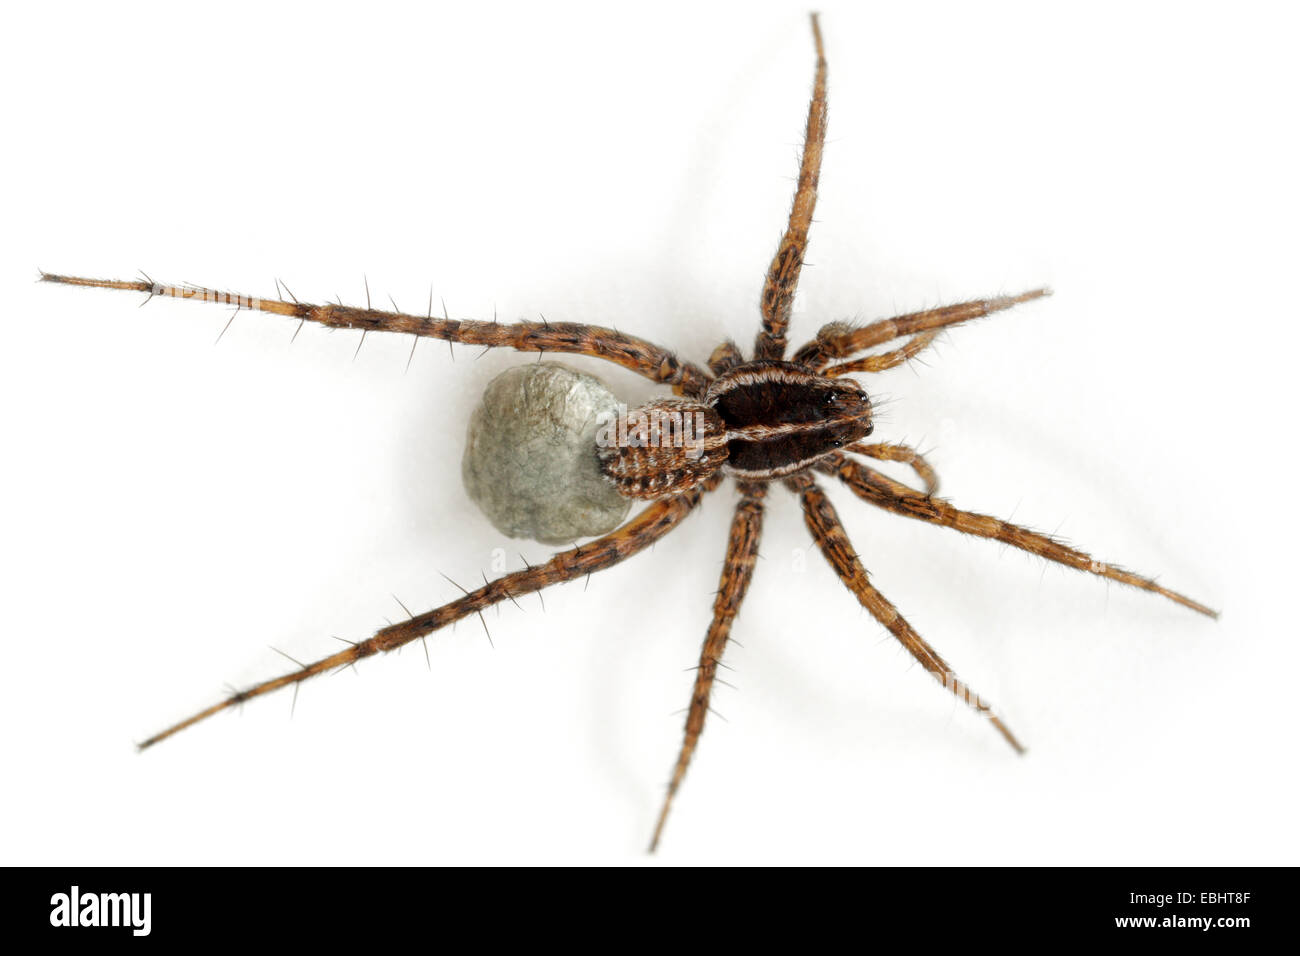 Female Pardosa palustris spider on white background. Family Lycosidae, Wolf spiders. The spider is carrying an egg sac under its spinners. Leg missing Stock Photo